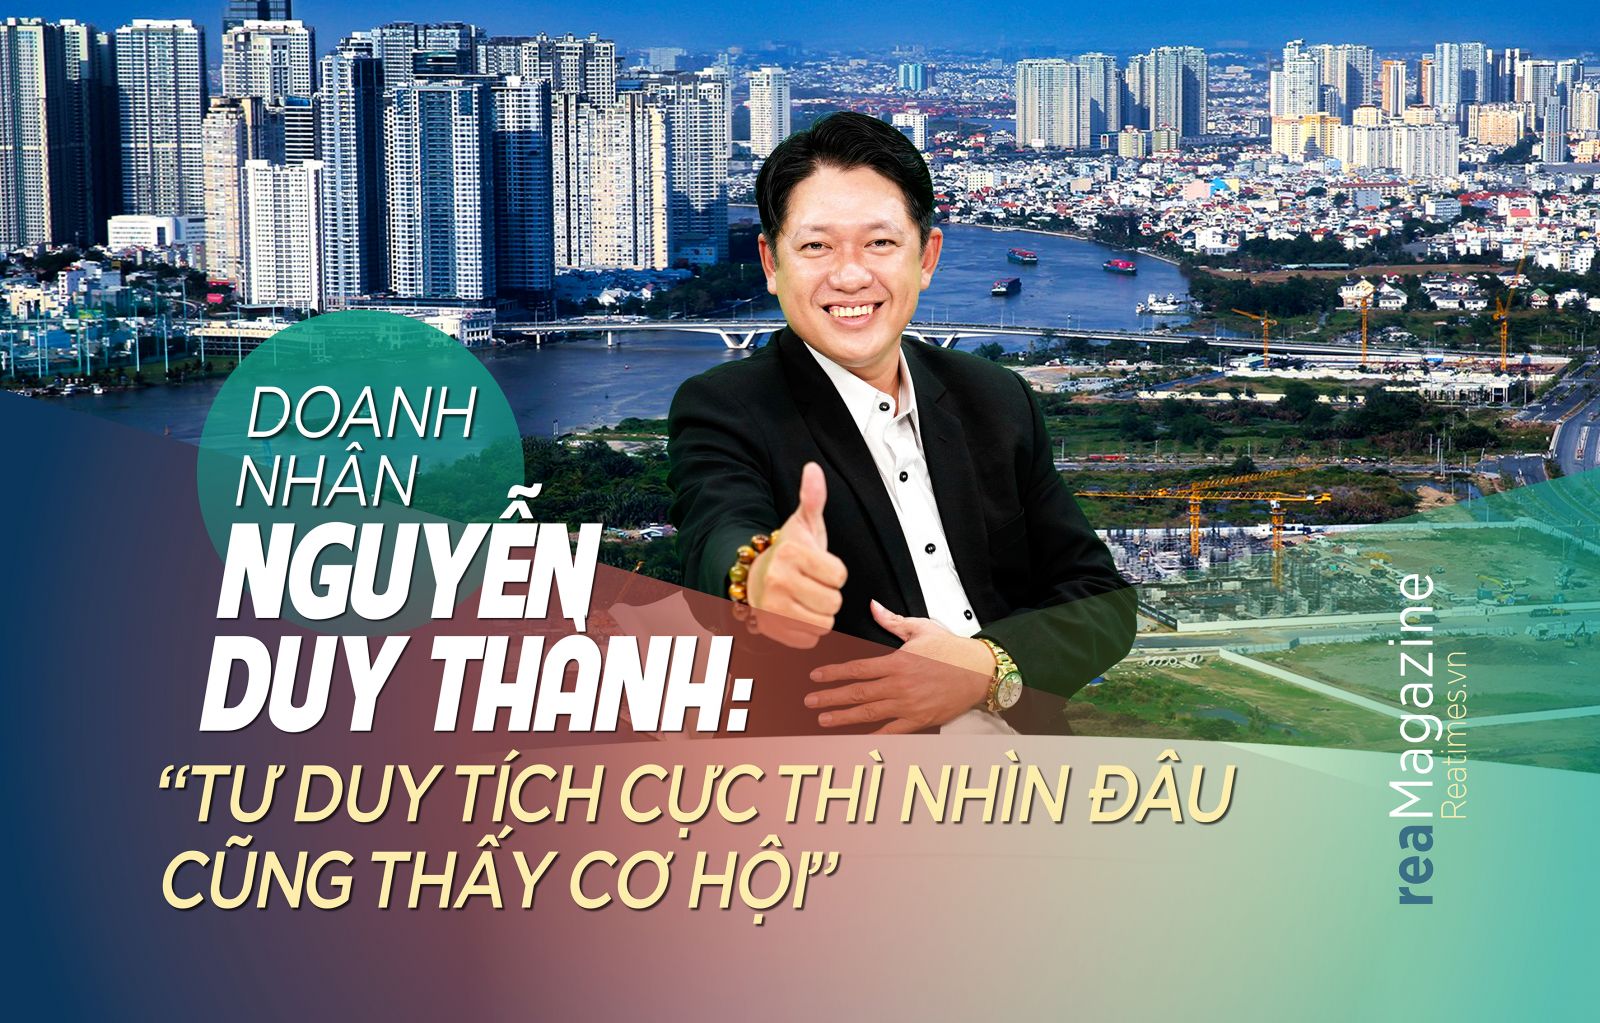 COVER_NGUYEN_DUY_THANH.jpg